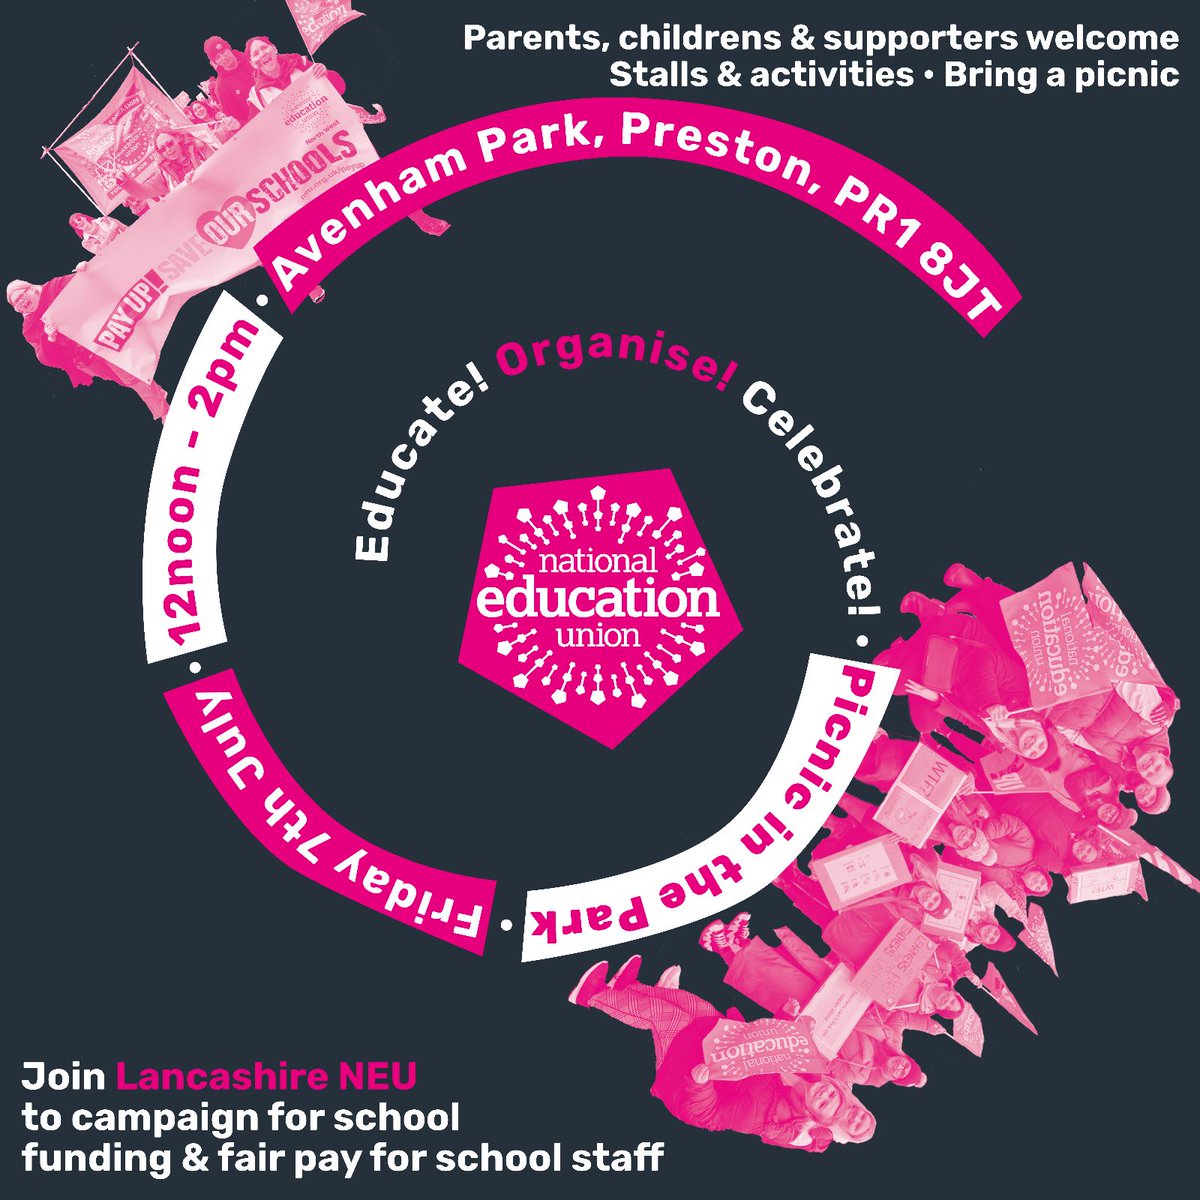 Picnic in the Park

On strike day 8, Friday 7th July, join teachers, parents and kids from across Lancashire for a festival picnic in Avenham Park, Preston. 

We will be in the park from 12 noon to 2pm. There will be speeches, stalls and activities. 

#SaveOurSchools #payupnow